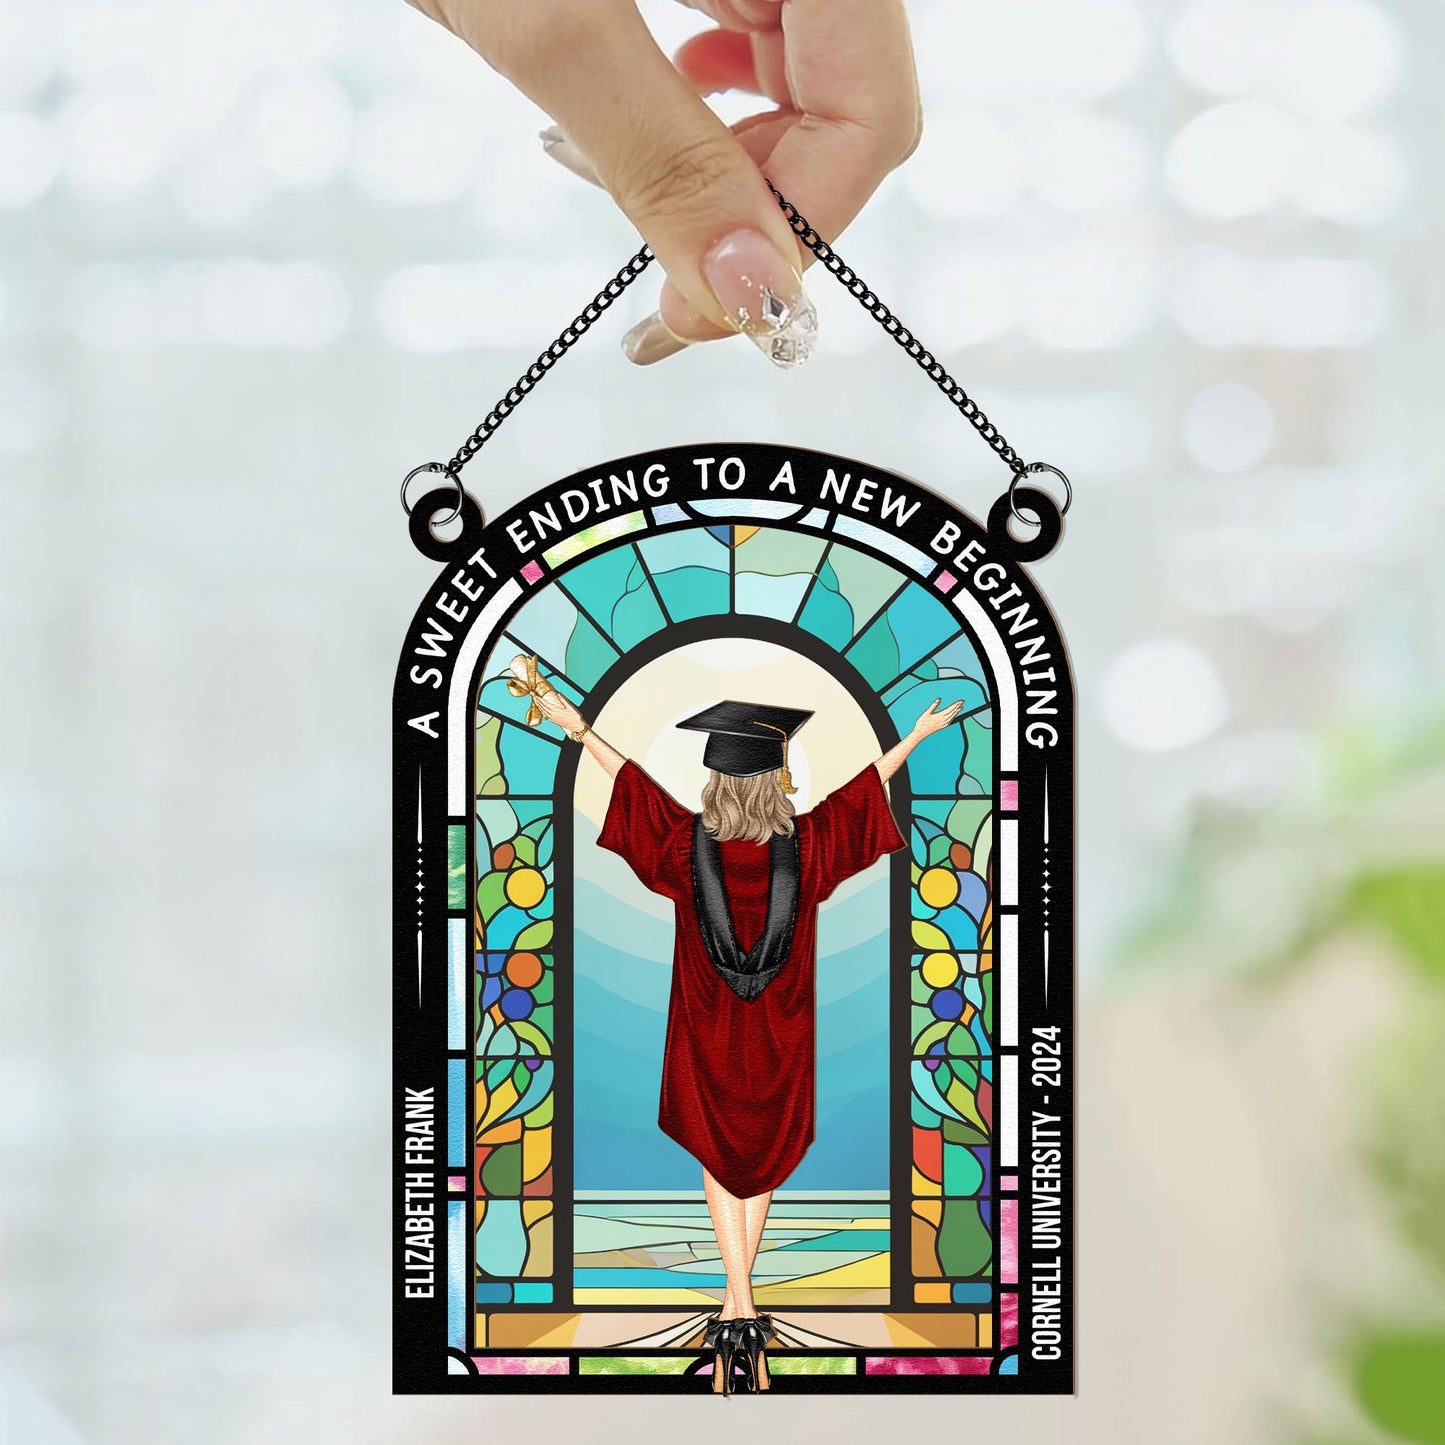 Sweet Ending To New Beginning - Personalized Window Hanging Suncatcher Ornament